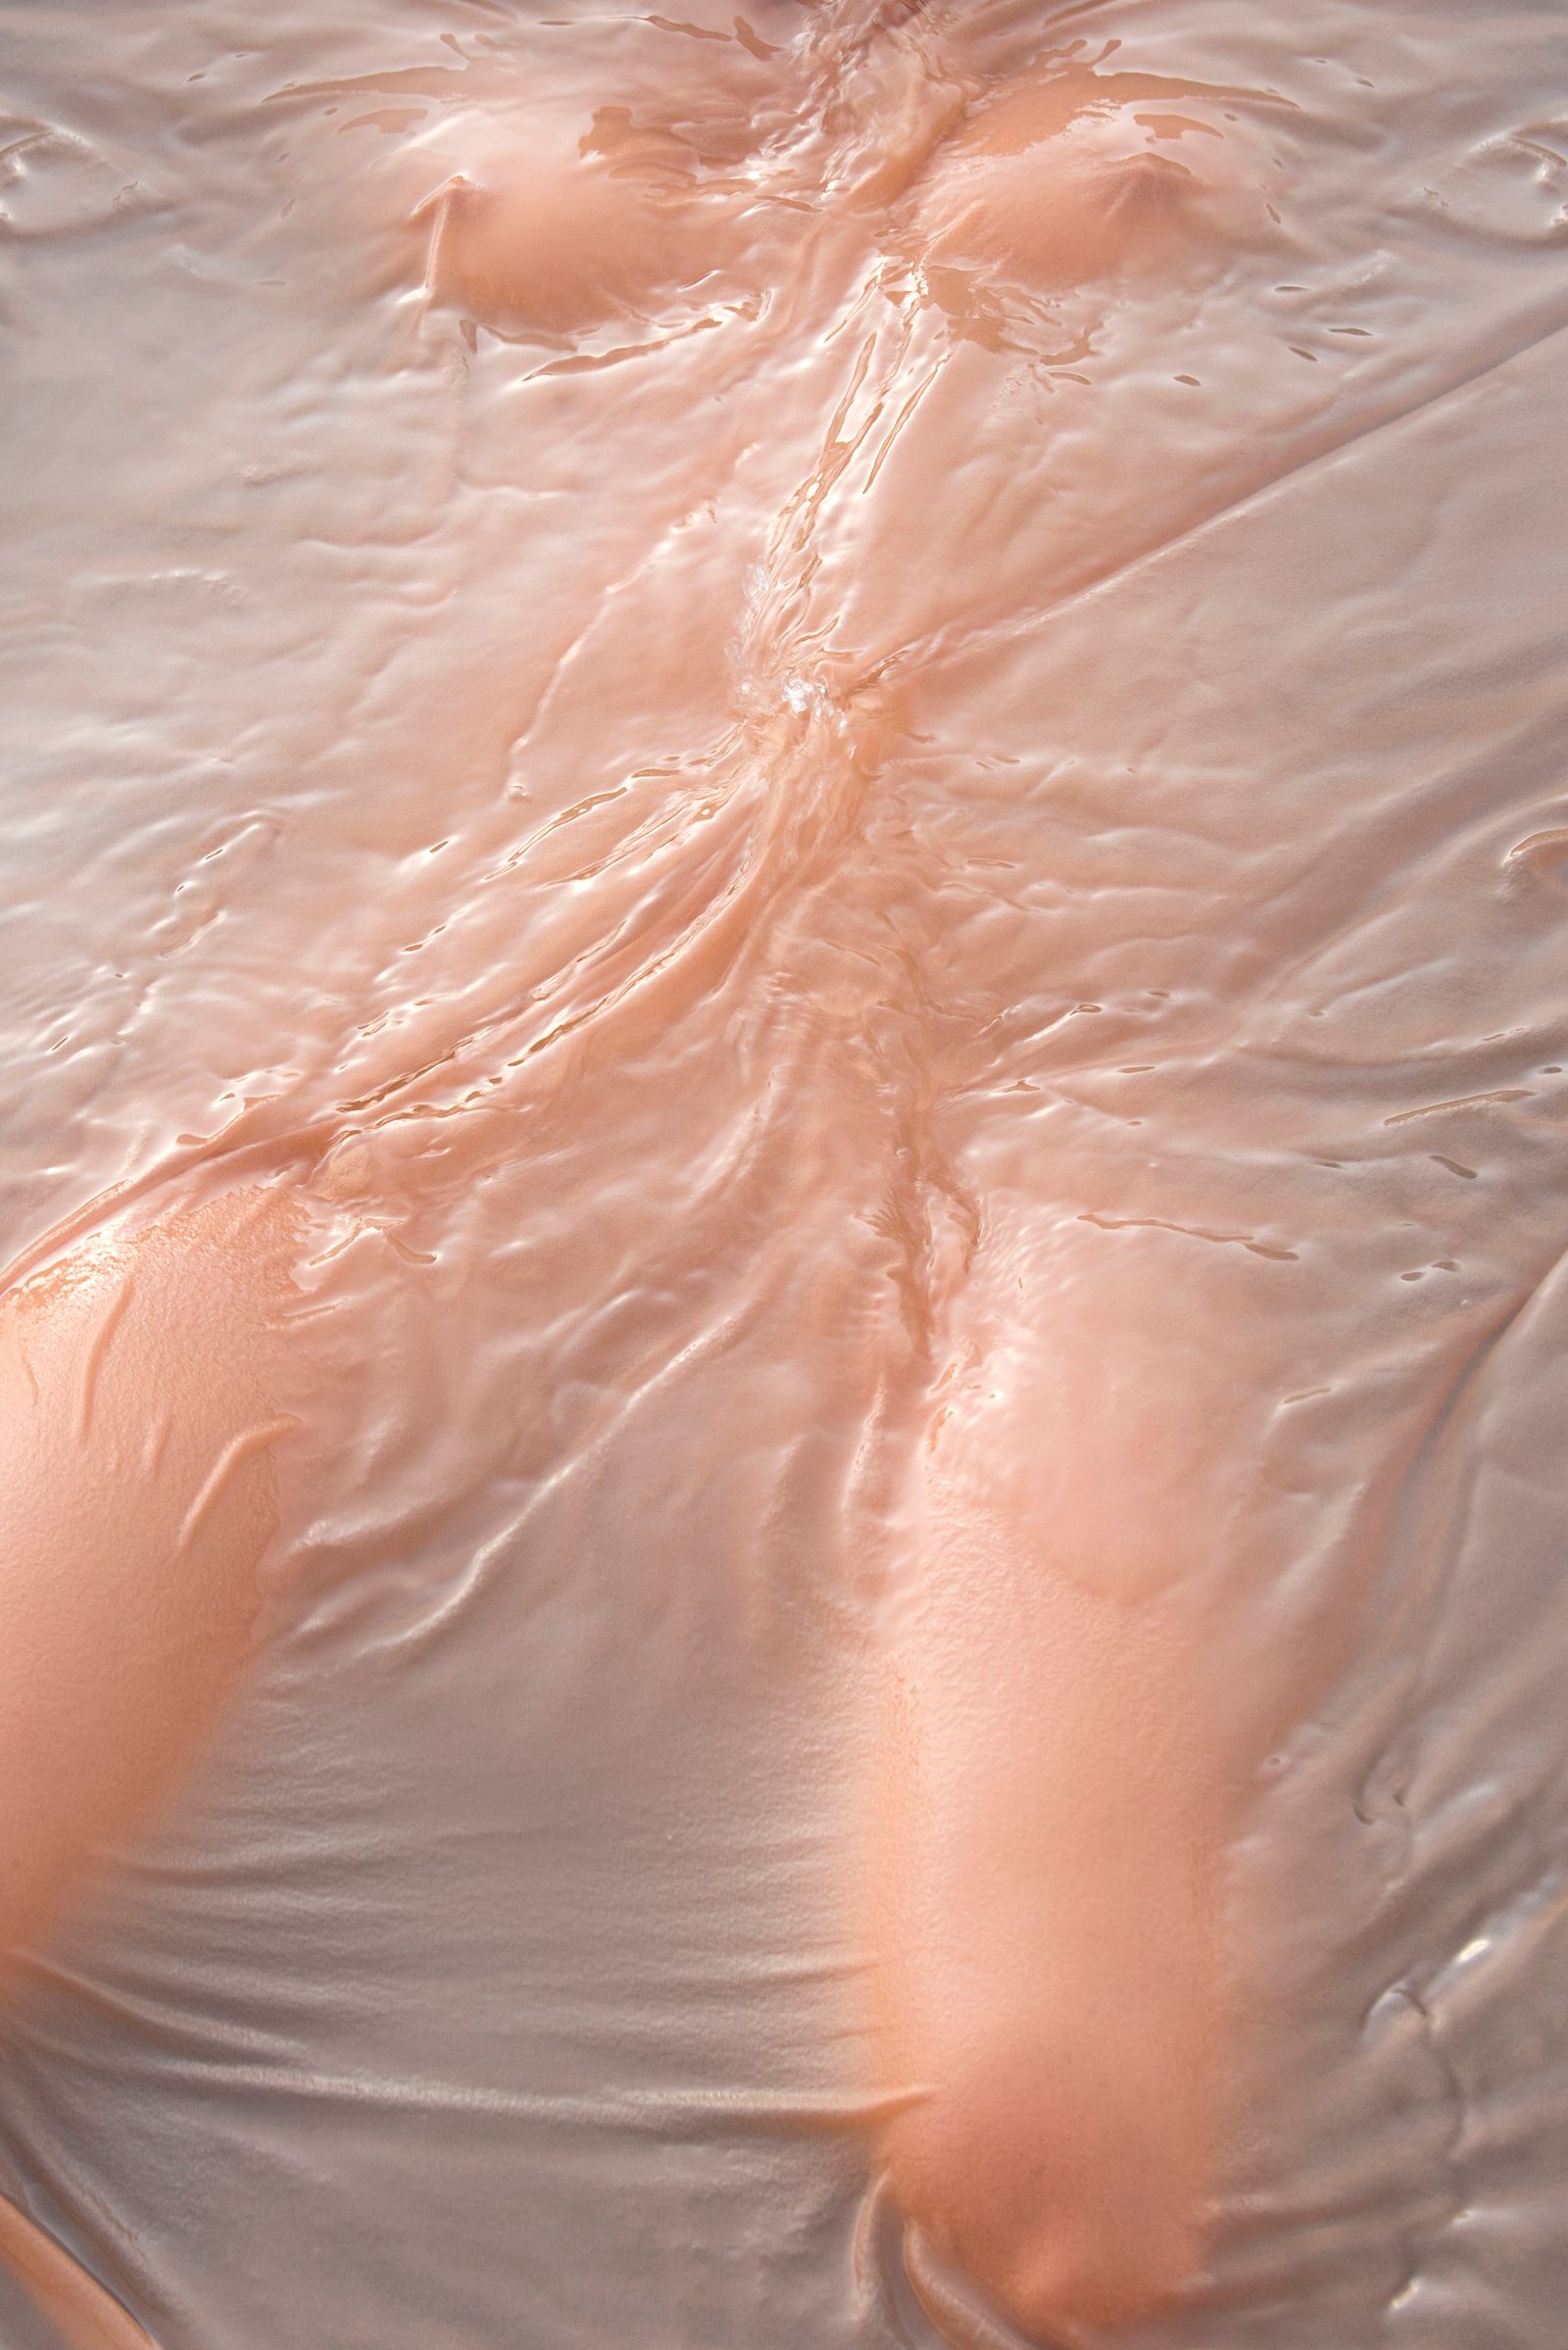 © Honey Long Prue Stent - Image from the Touching Pool photography project